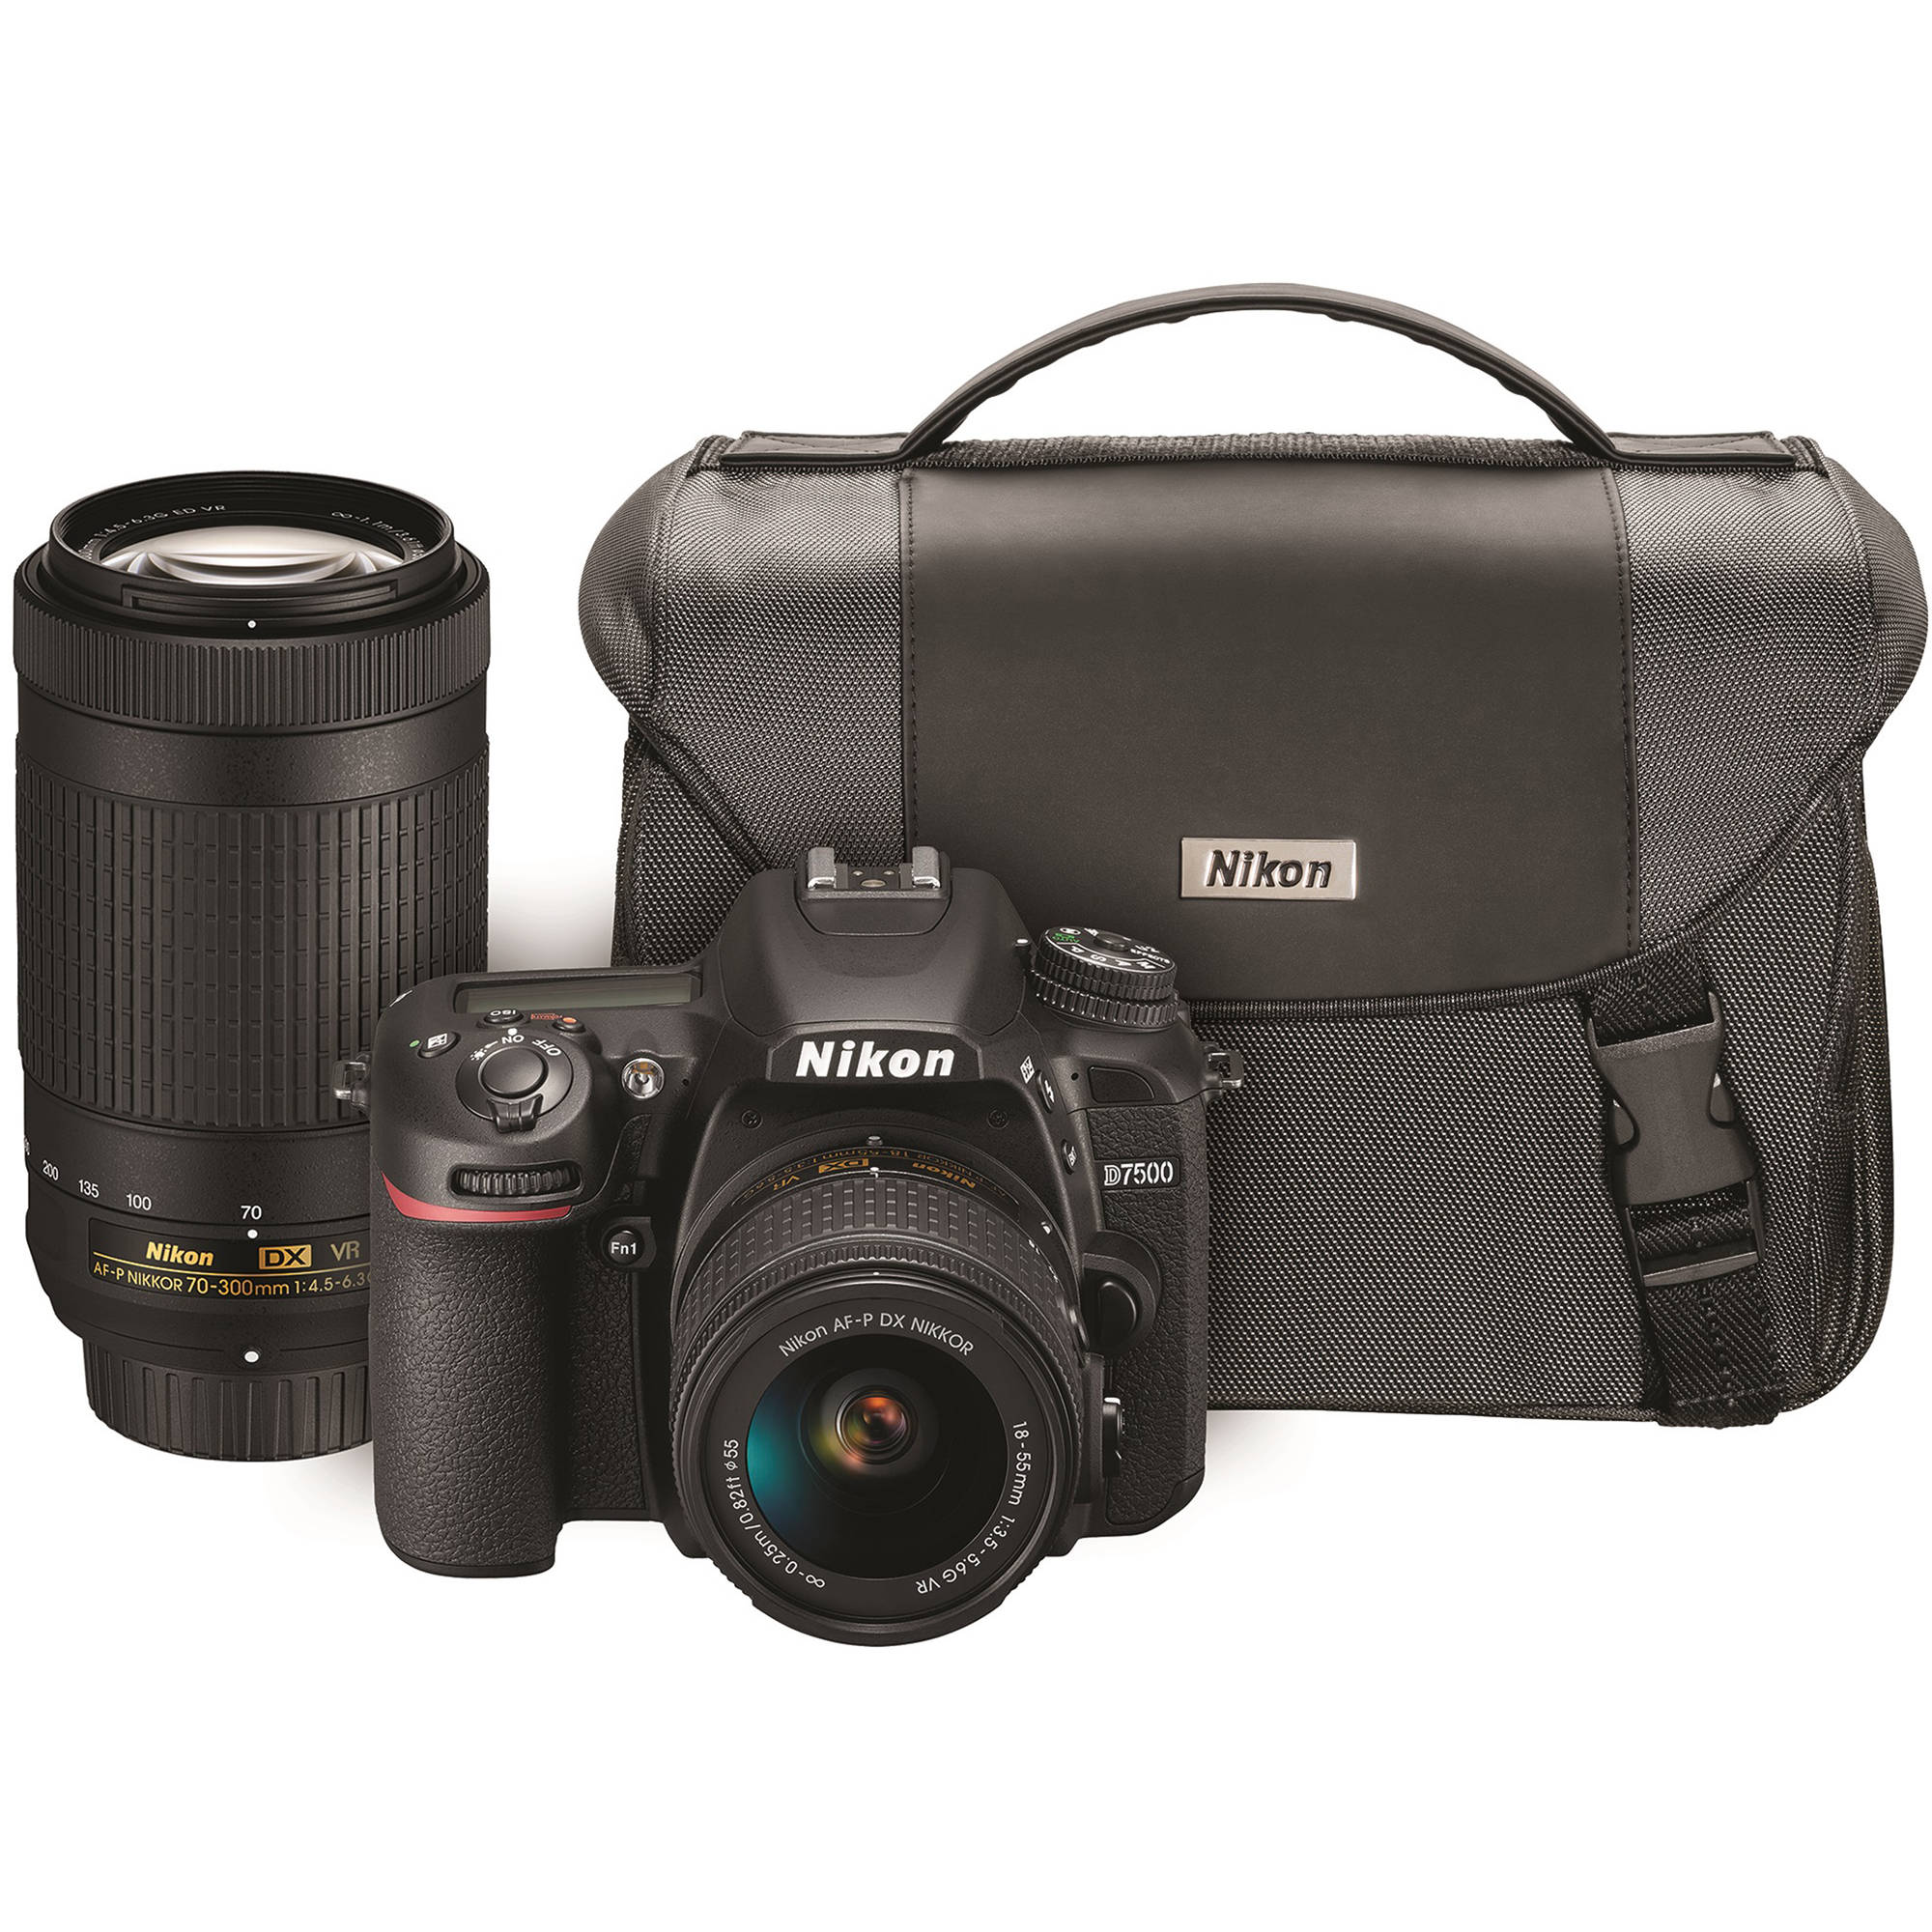 Nikon D7500 Dslr Camera With 18 55mm And 70 300mm Vr Lenses